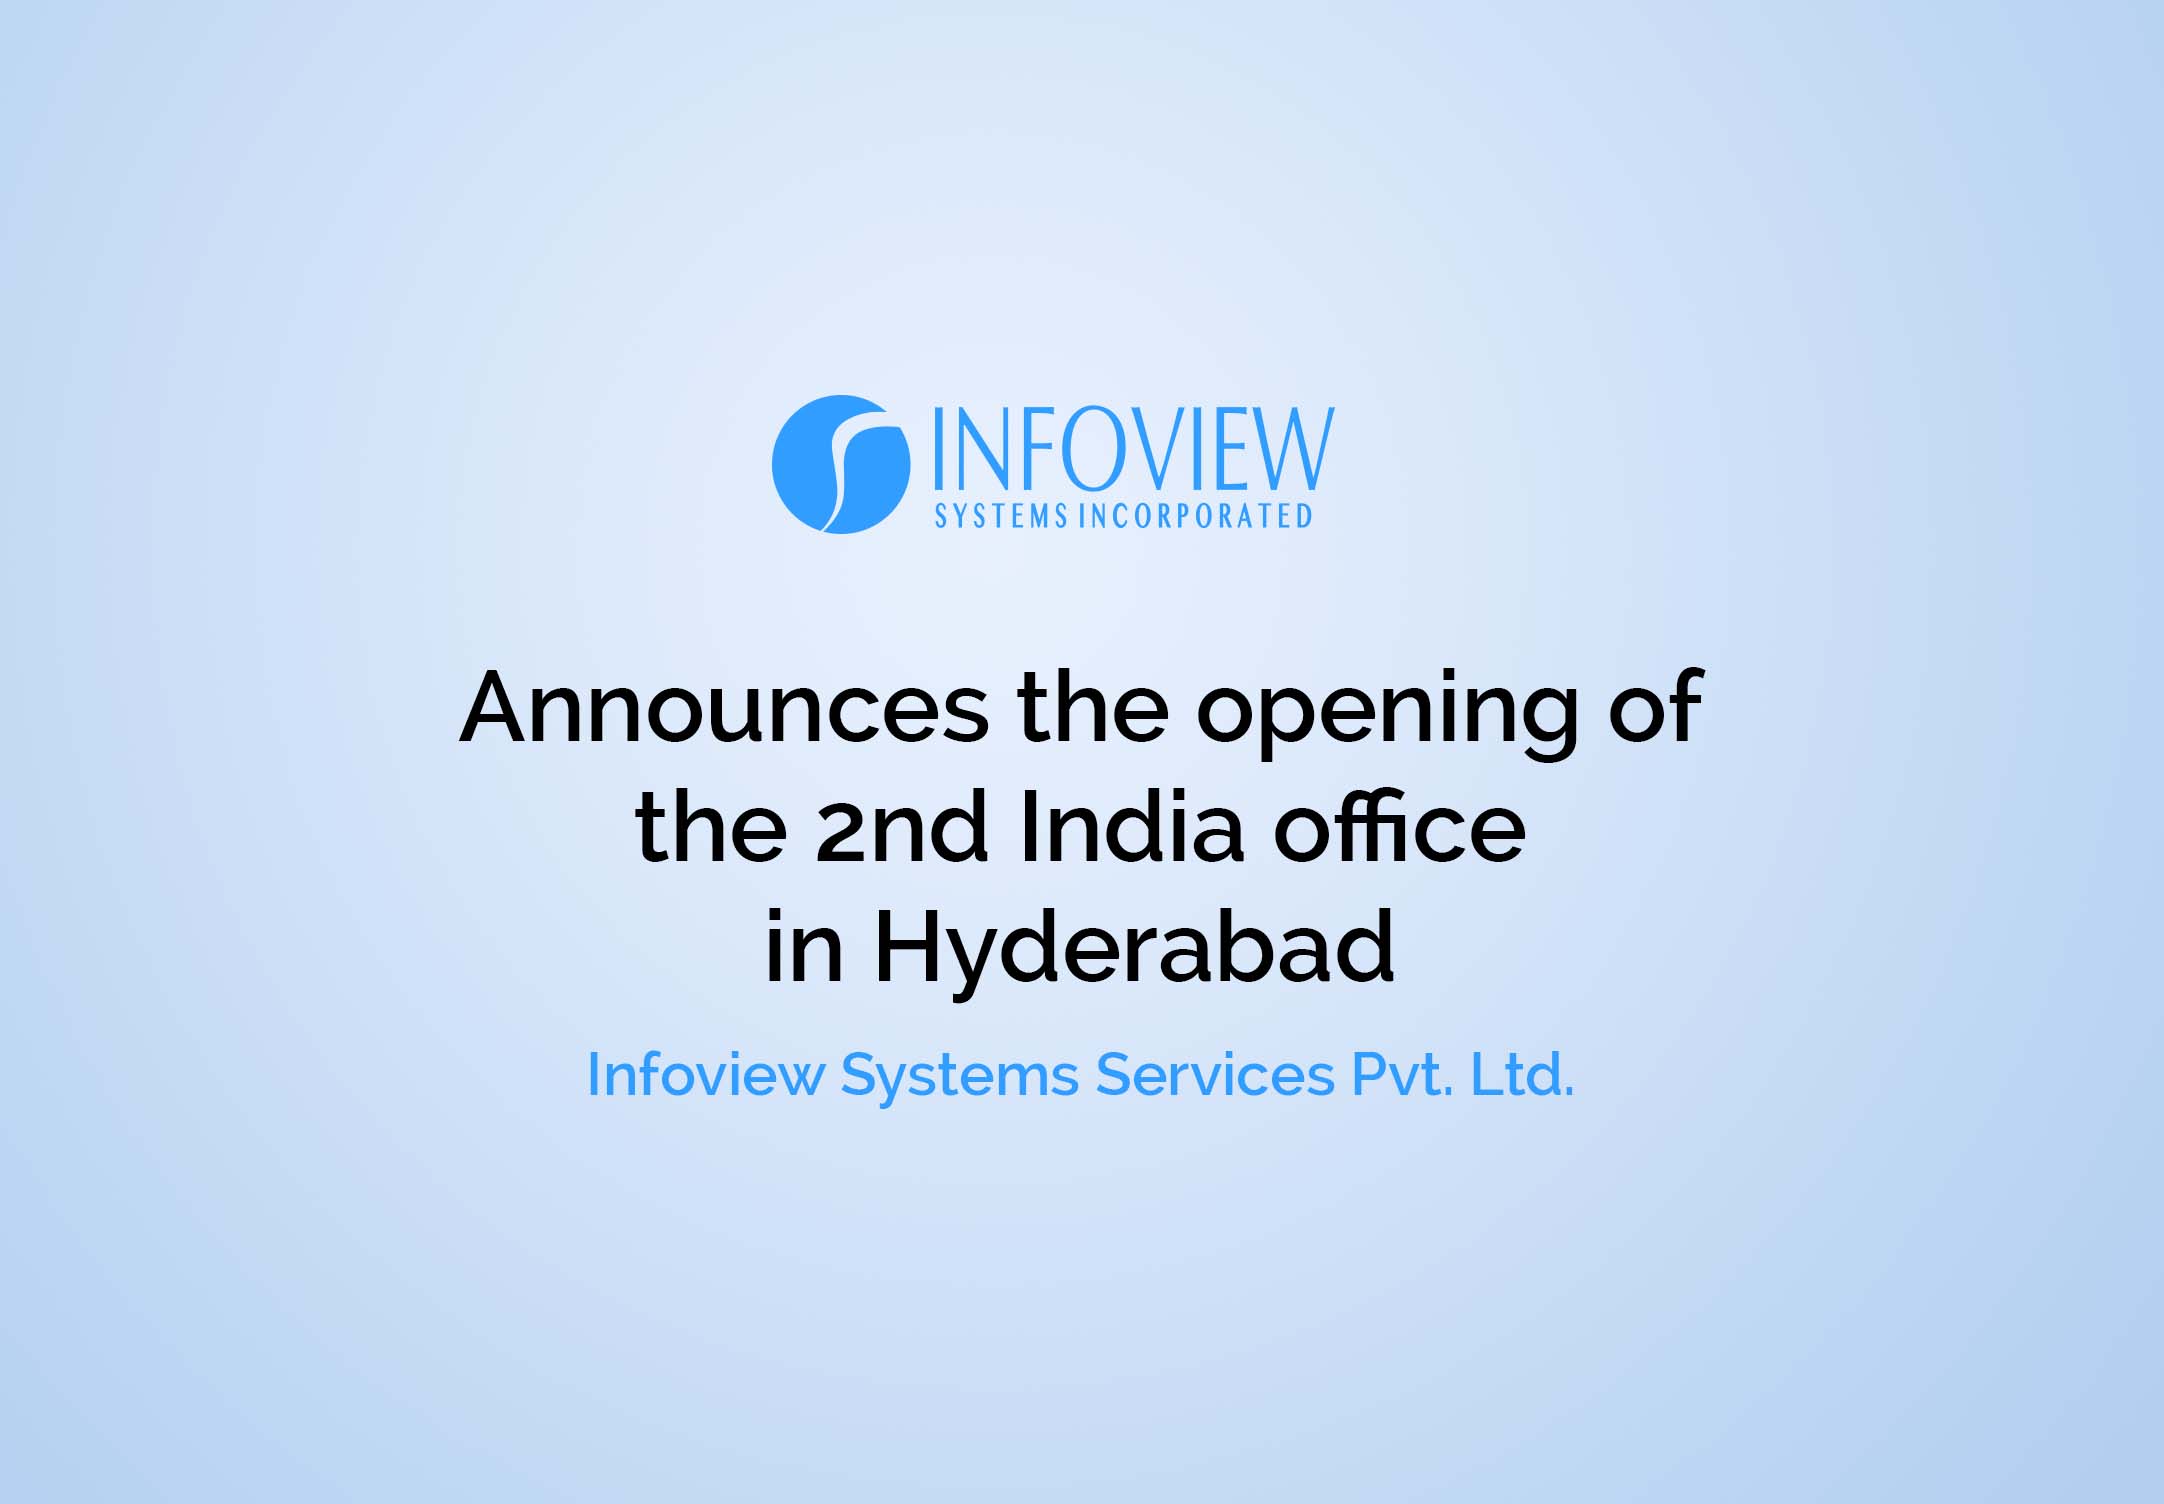 India office in Hyderabad News